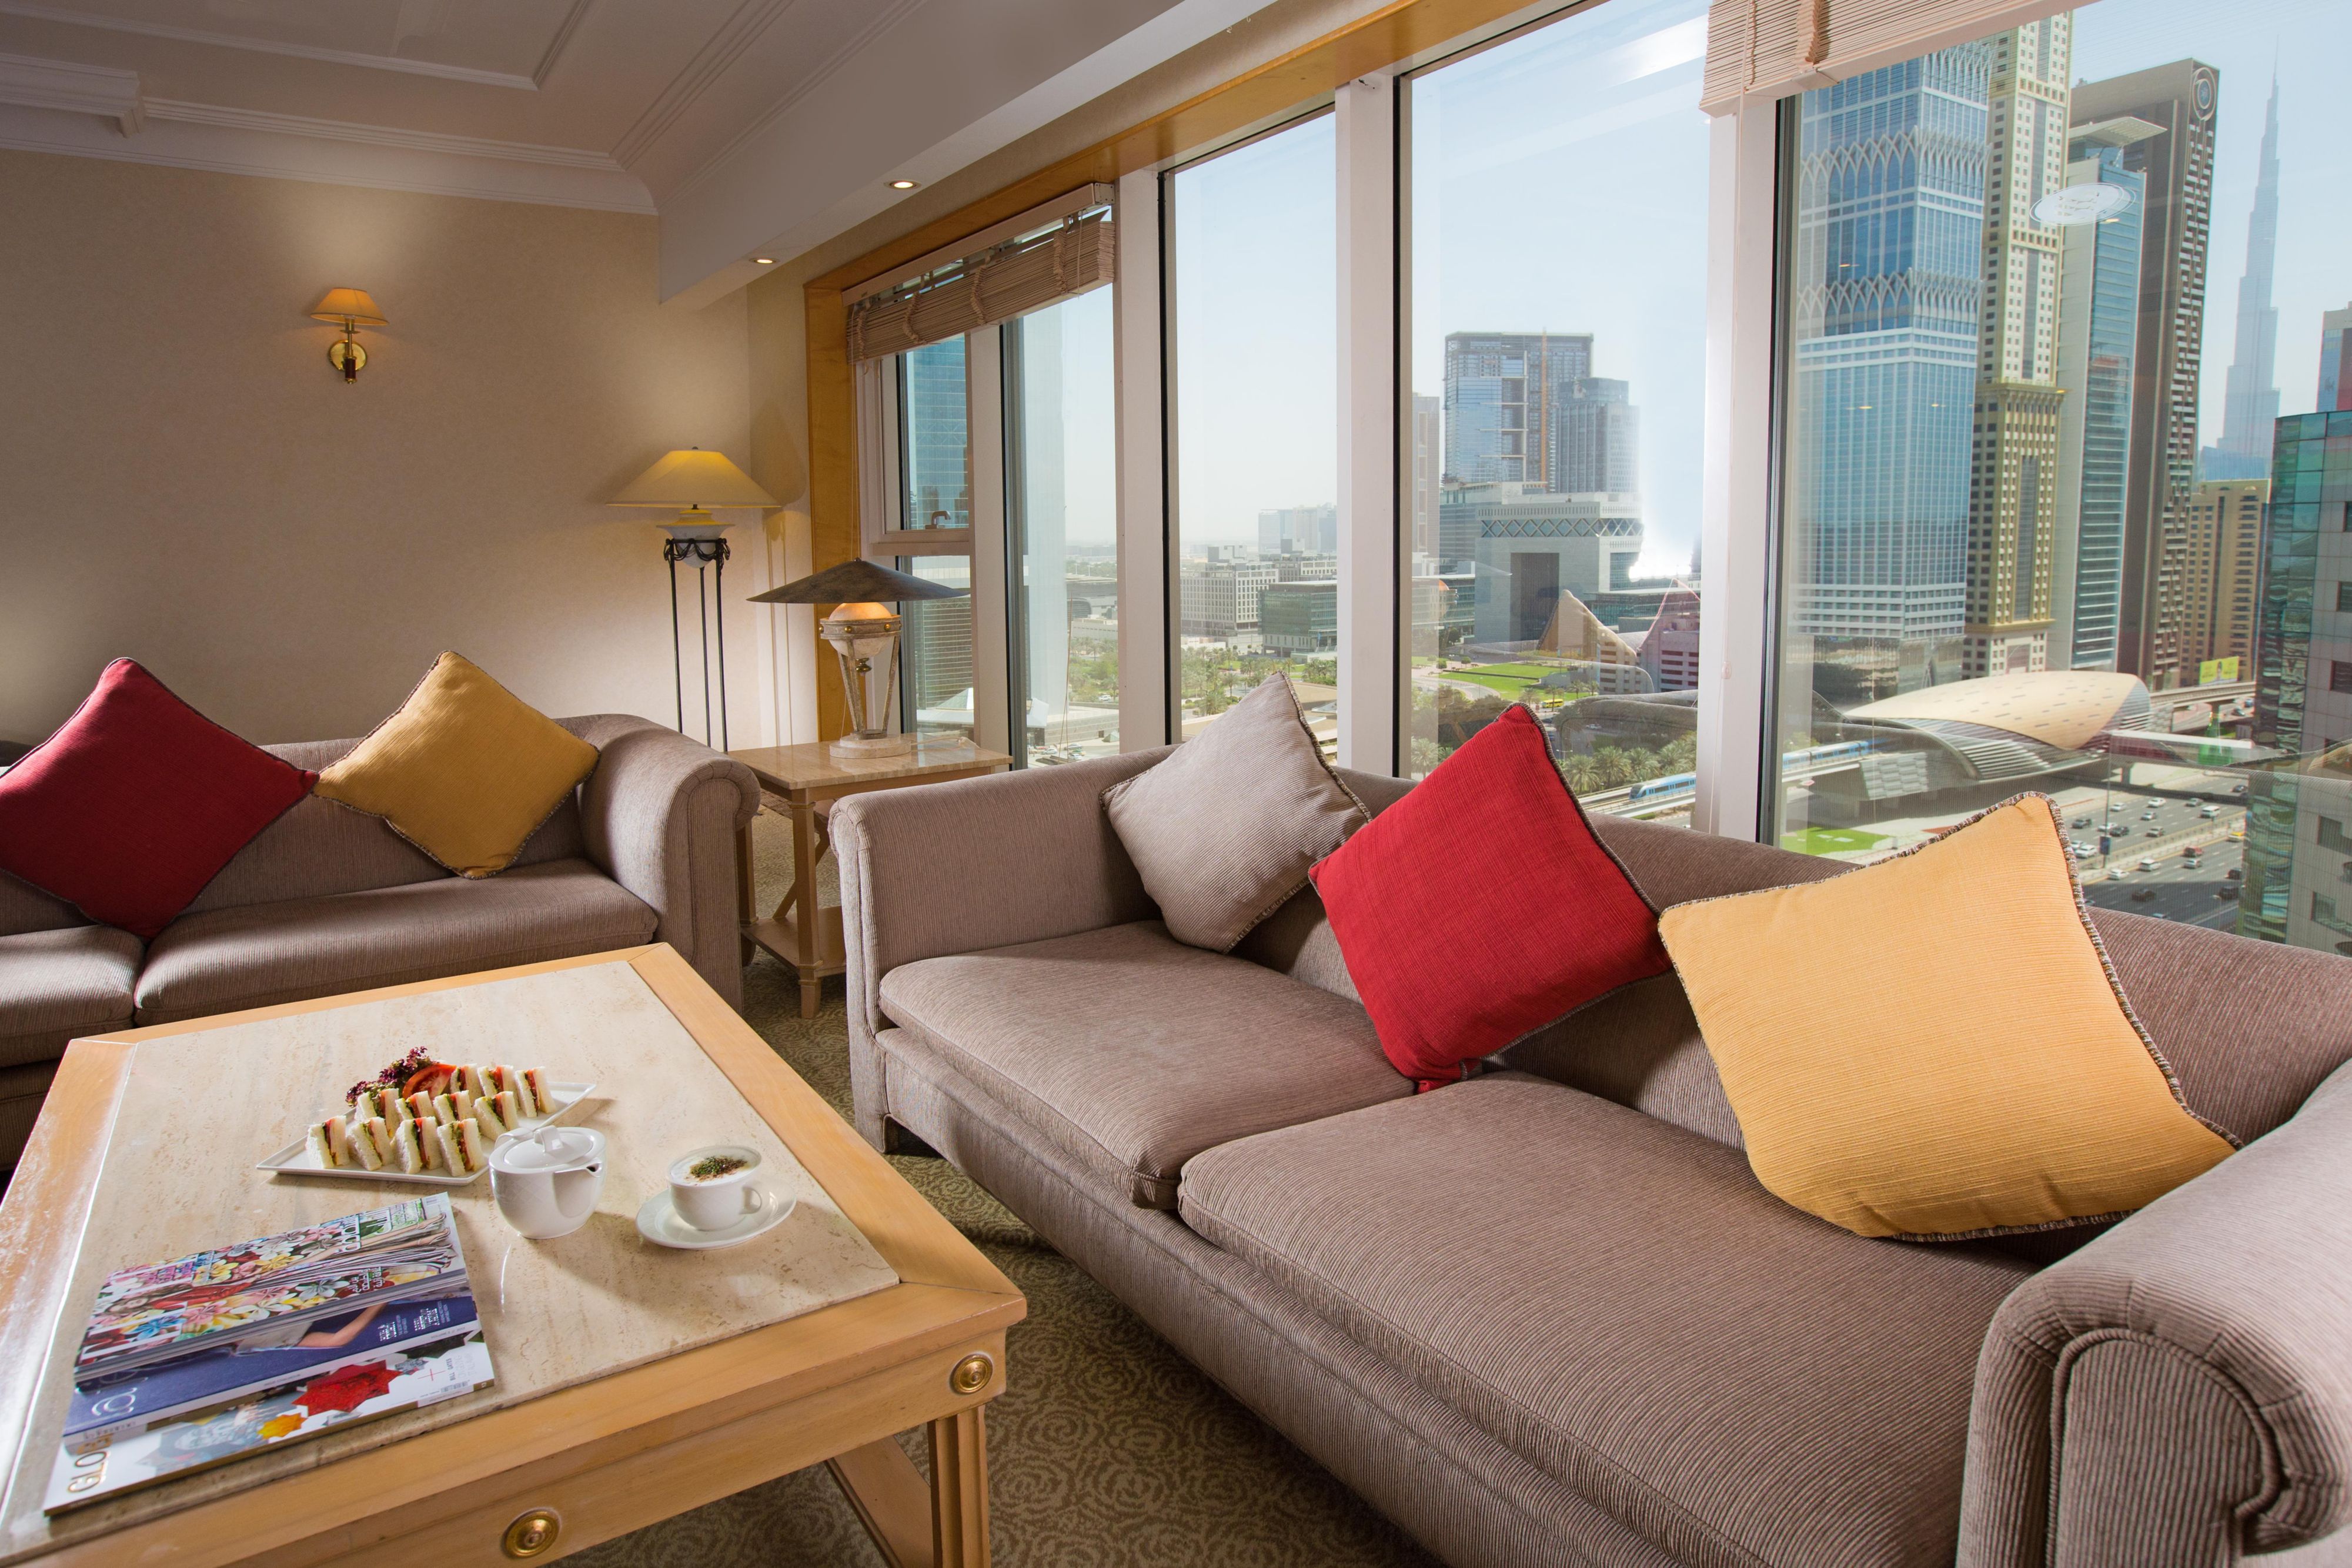 Club Room guests get exclusive access to our Club Lounge